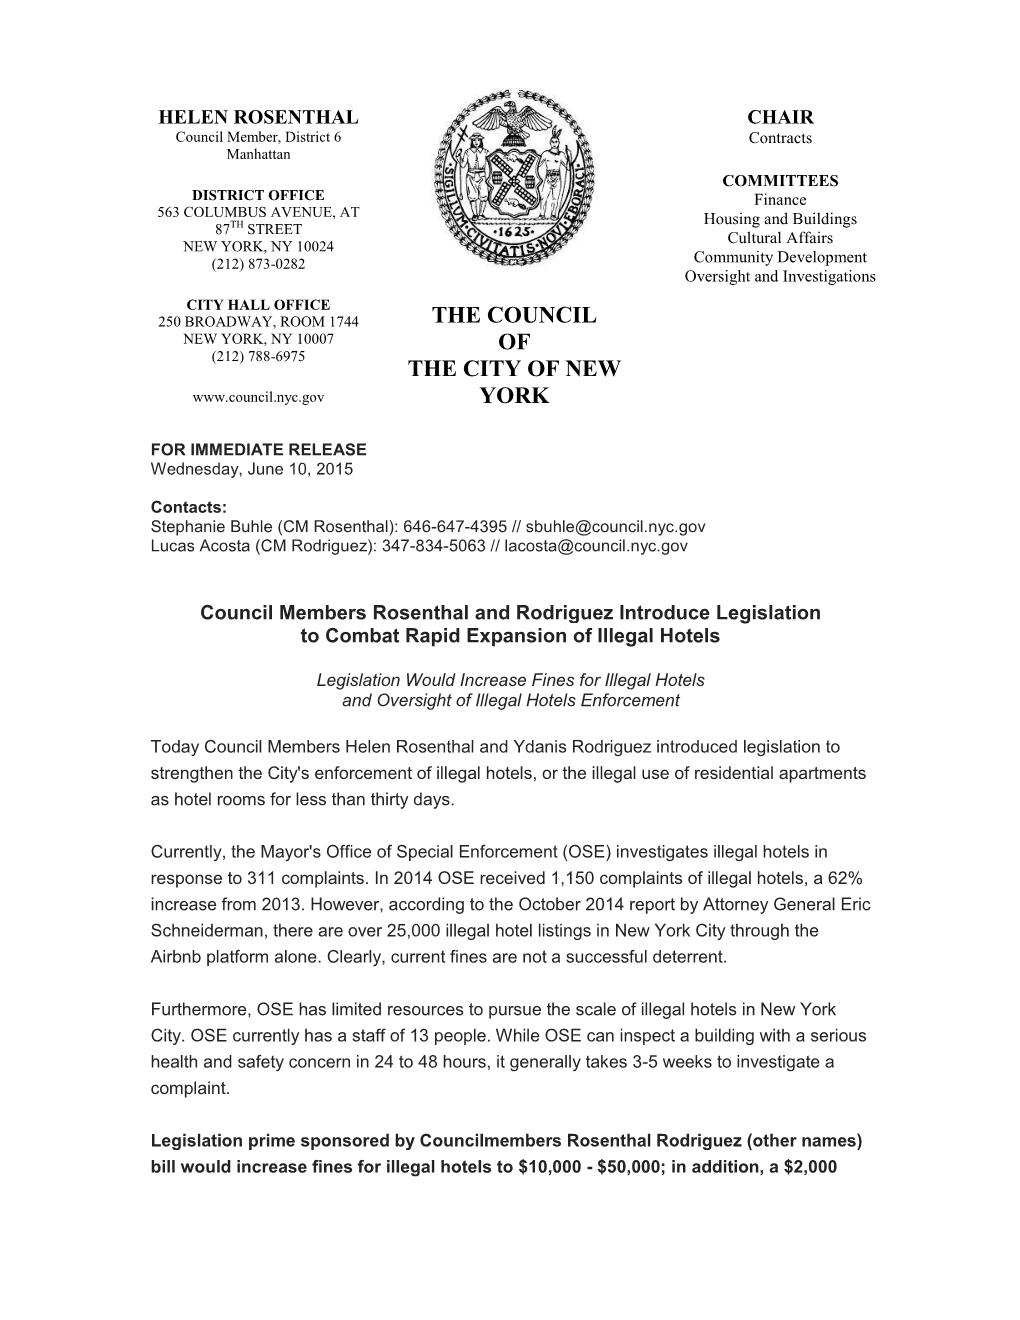 Council Members Rosenthal and Rodriguez Introduce Legislation to Combat Rapid Expansion of Illegal Hotels